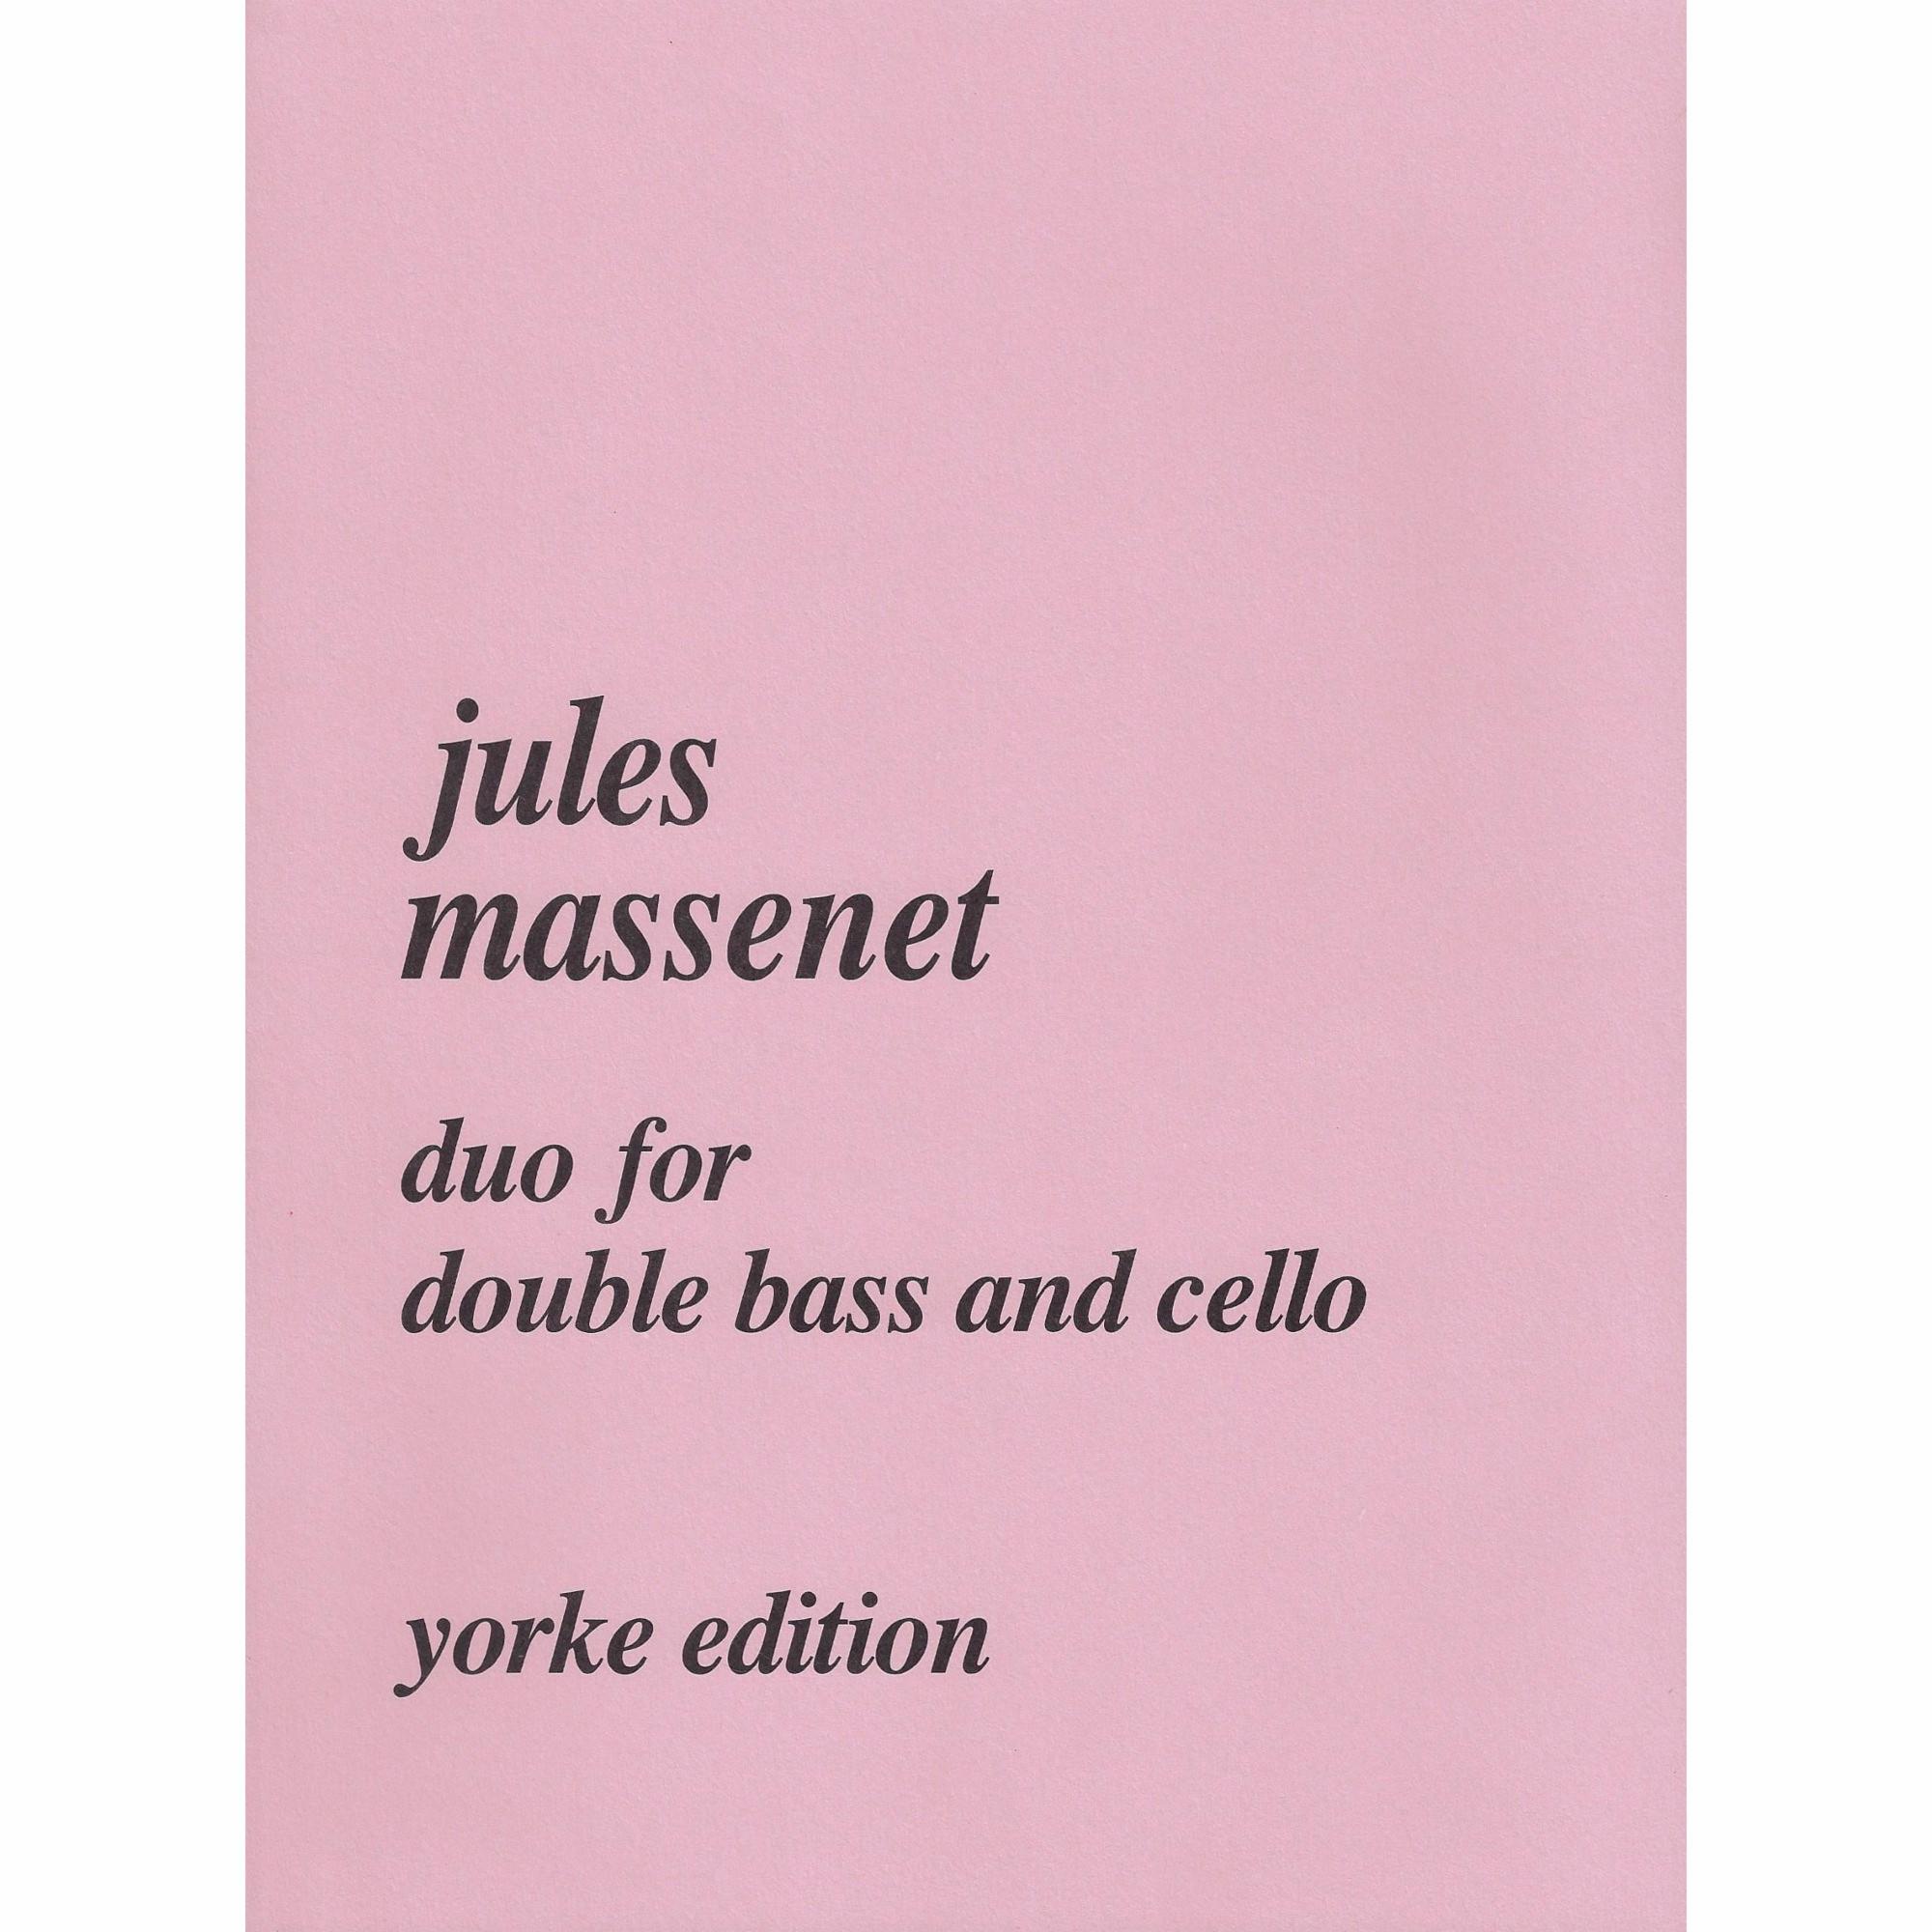 Massenet -- Duo for Double Bass and Cello